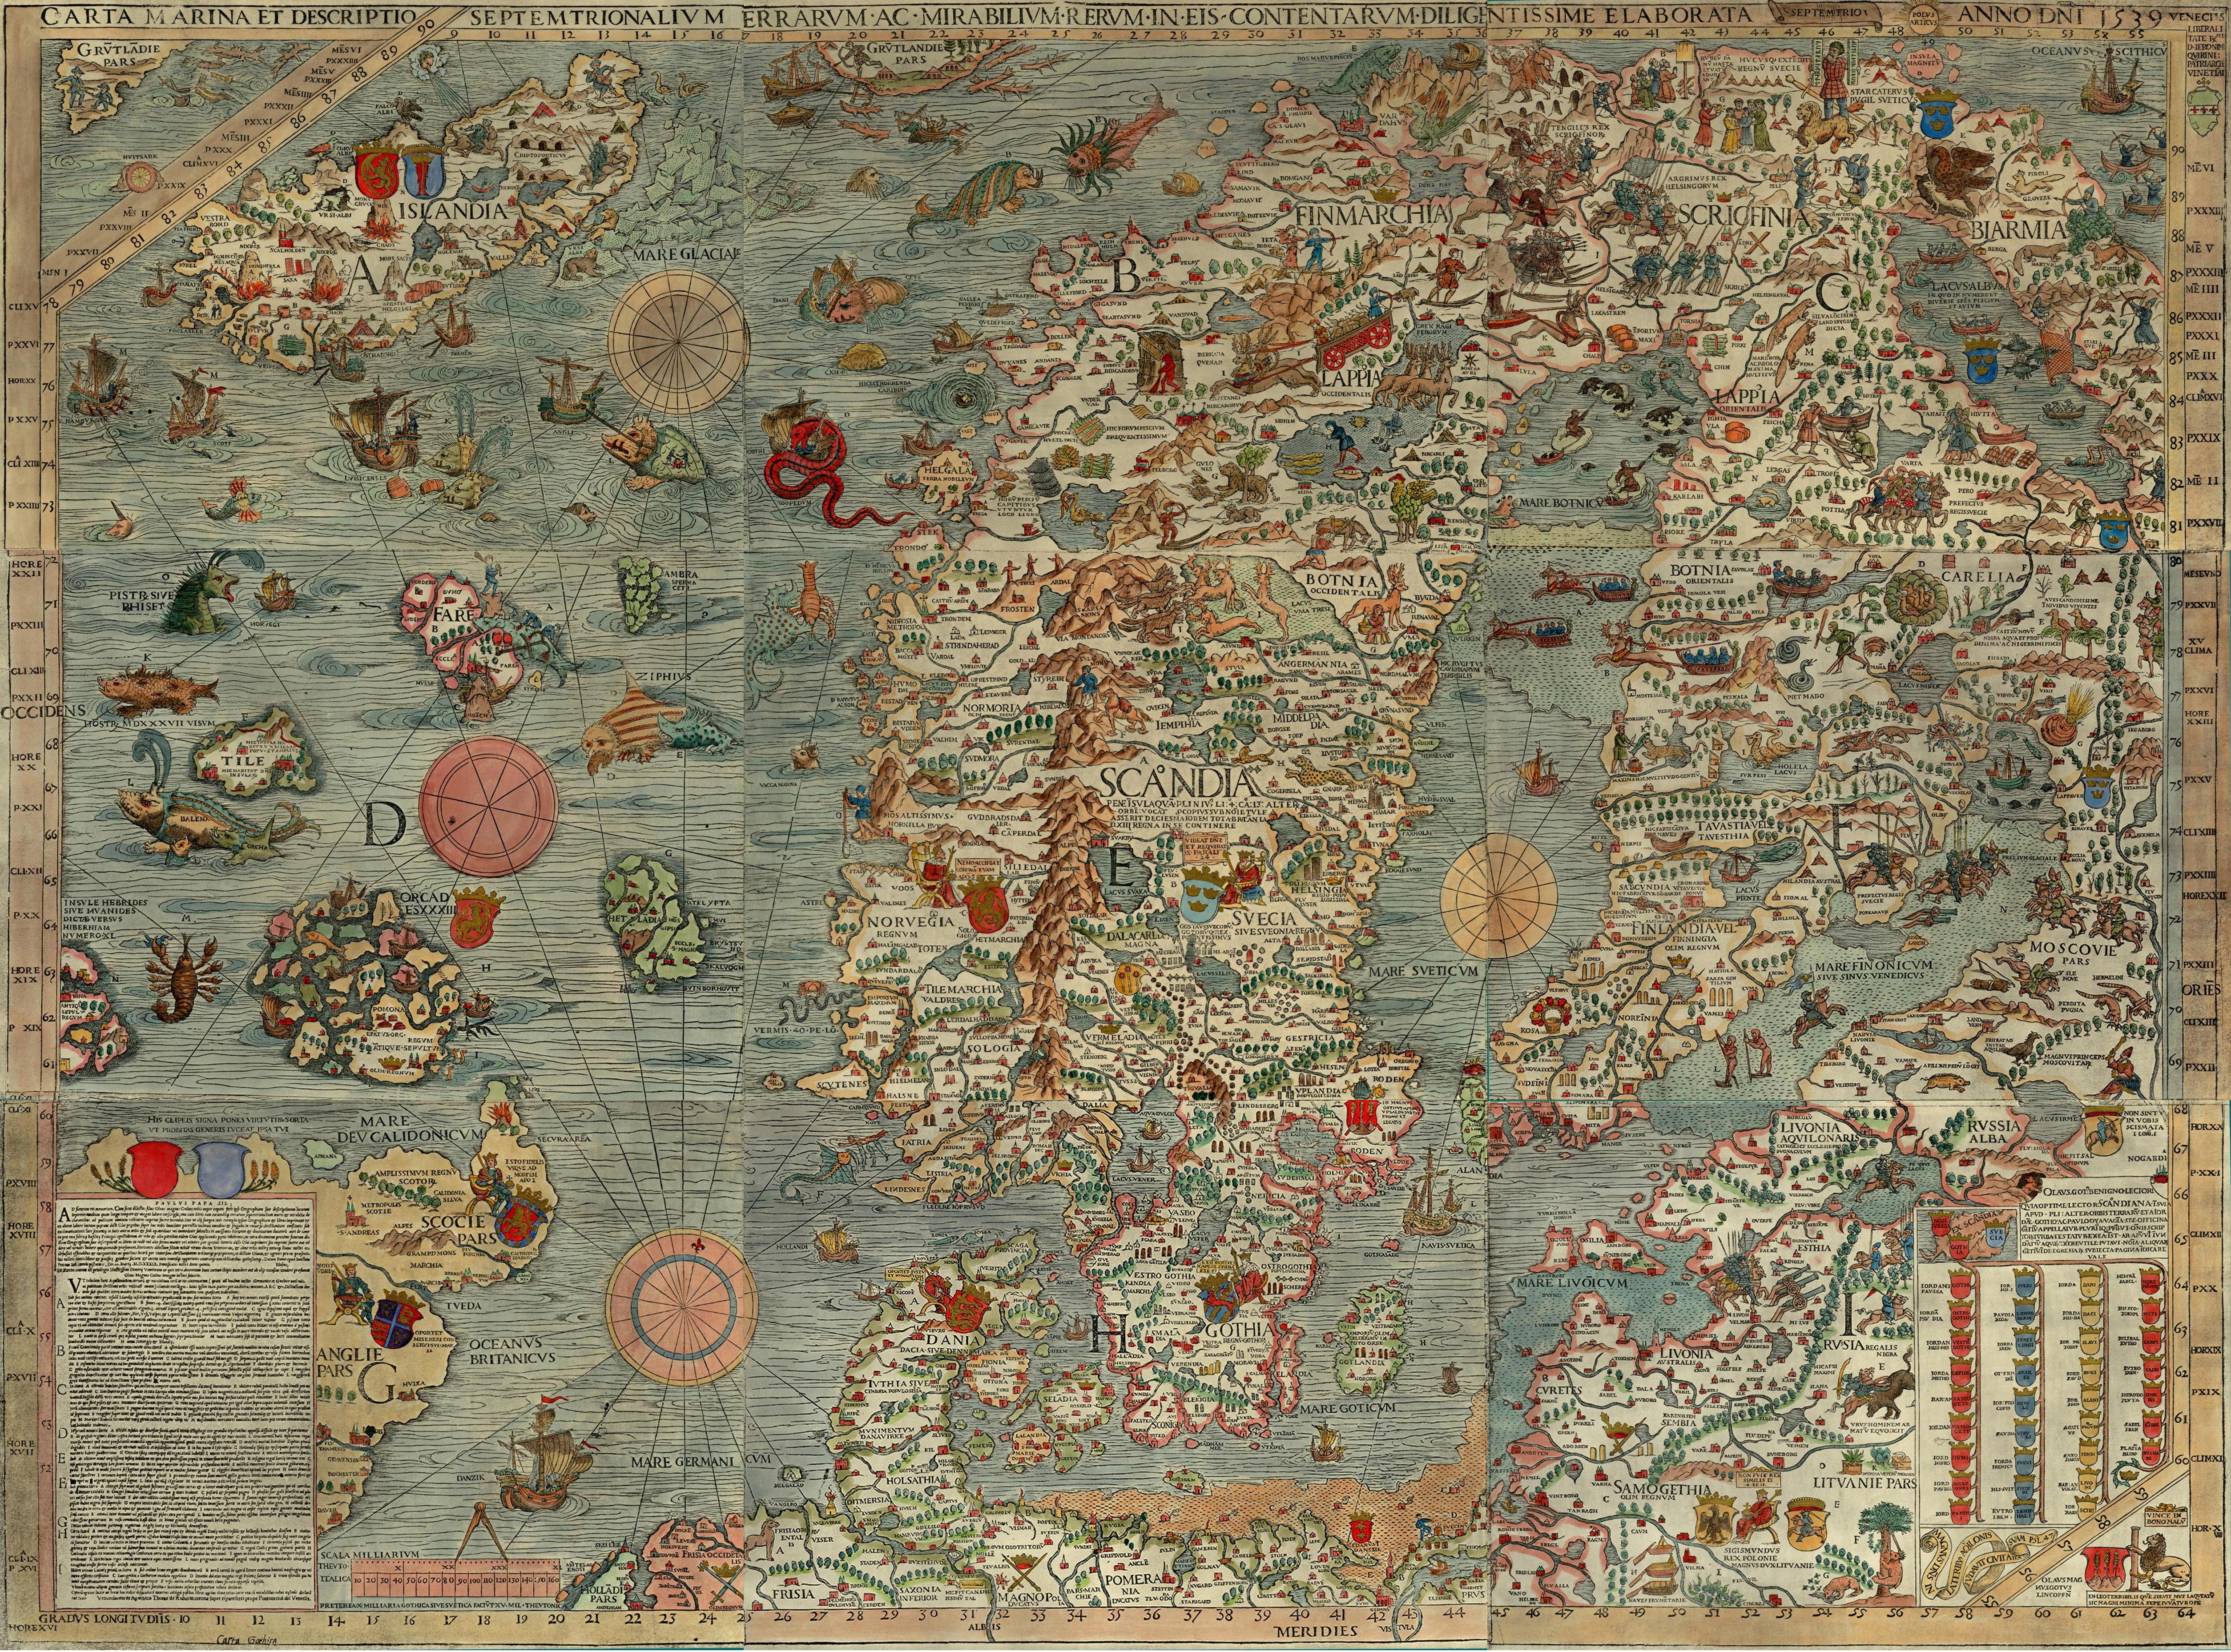 The Viking Imagination: Medieval Cartography of Scandinavia http://wp.me/p41CQf-Iuf